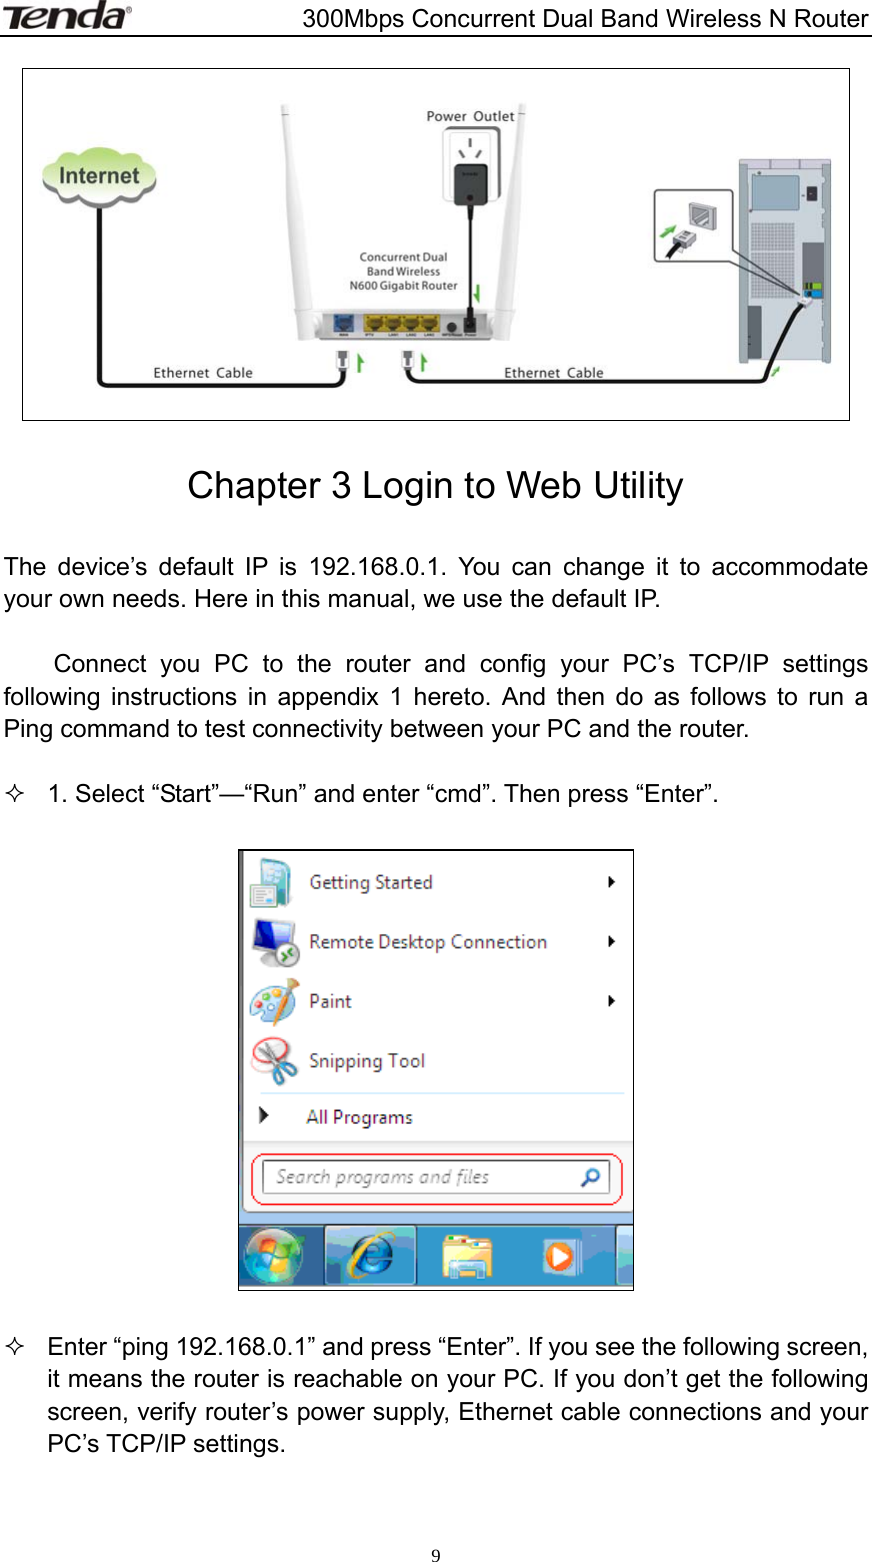                       300Mbps Concurrent Dual Band Wireless N Router  9  Chapter 3 Login to Web Utility  The device’s default IP is 192.168.0.1. You can change it to accommodate your own needs. Here in this manual, we use the default IP.    Connect you PC to the router and config your PC’s TCP/IP settings following instructions in appendix 1 hereto. And then do as follows to run a Ping command to test connectivity between your PC and the router.    1. Select “Start”—“Run” and enter “cmd”. Then press “Enter”.      Enter “ping 192.168.0.1” and press “Enter”. If you see the following screen, it means the router is reachable on your PC. If you don’t get the following screen, verify router’s power supply, Ethernet cable connections and your PC’s TCP/IP settings.  